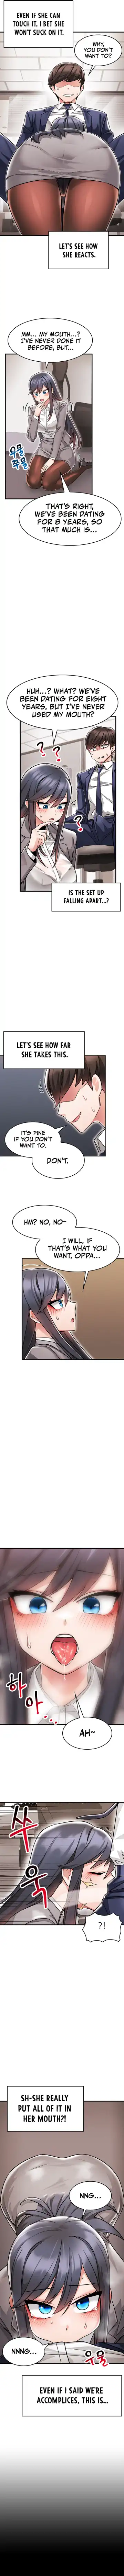 [Gaehoju] Relationship Reverse Button: Let's Make Her Submissive Fhentai.net - Page 13